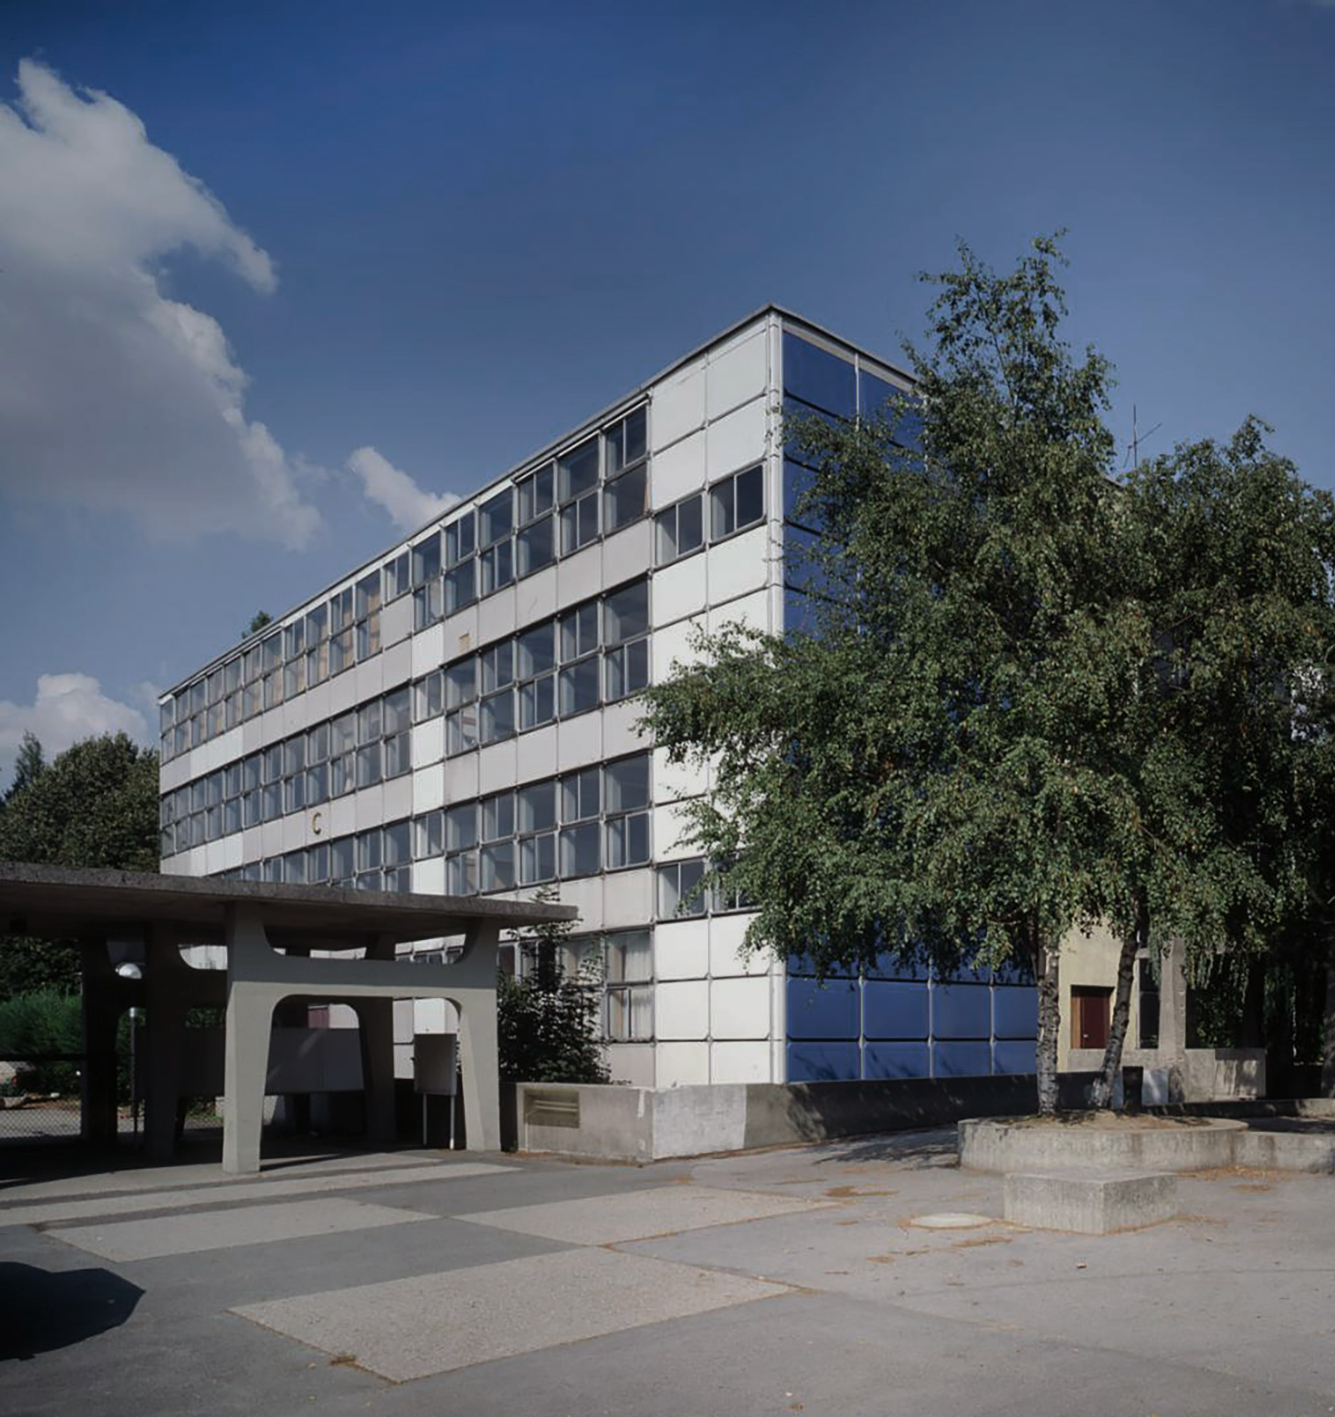 Secondary school Jean-Jacques Rousseau, Sarcelles, 1965 (Jean Prouvé with L. Petroff, J. Belmont, J.-C. Perillier and M. Silvy, architects.). Design and building competition (C.C.C.) organized by the French Ministry of Education.